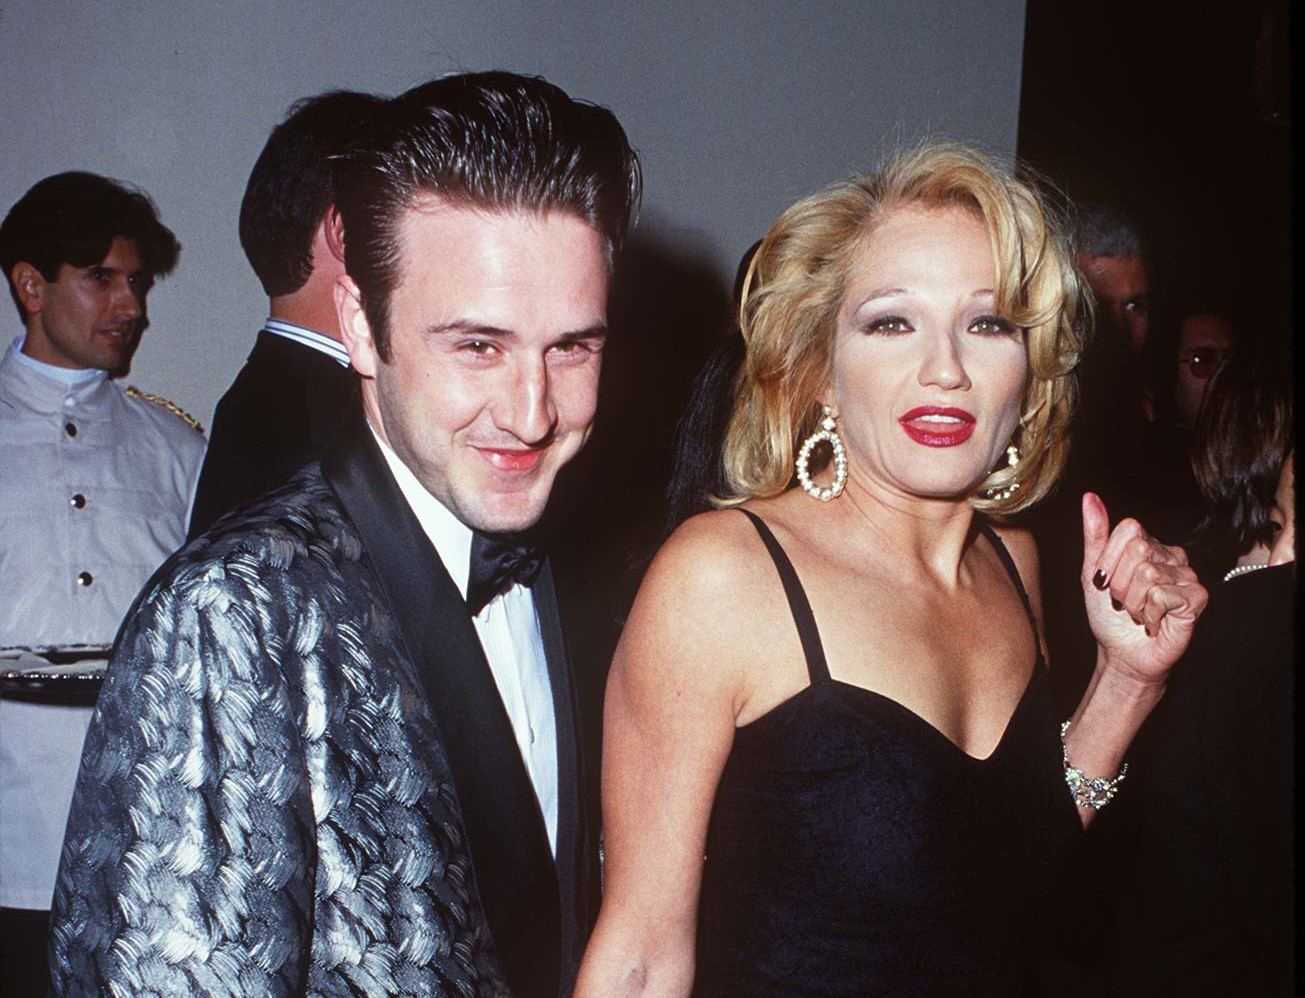 David Arquette and Ellen Barkin at the 5th Annual Fire and Ice Ball to Benefit Revlon UCLA Women Cancer Center on December 7, 1994. | Source: Getty Images